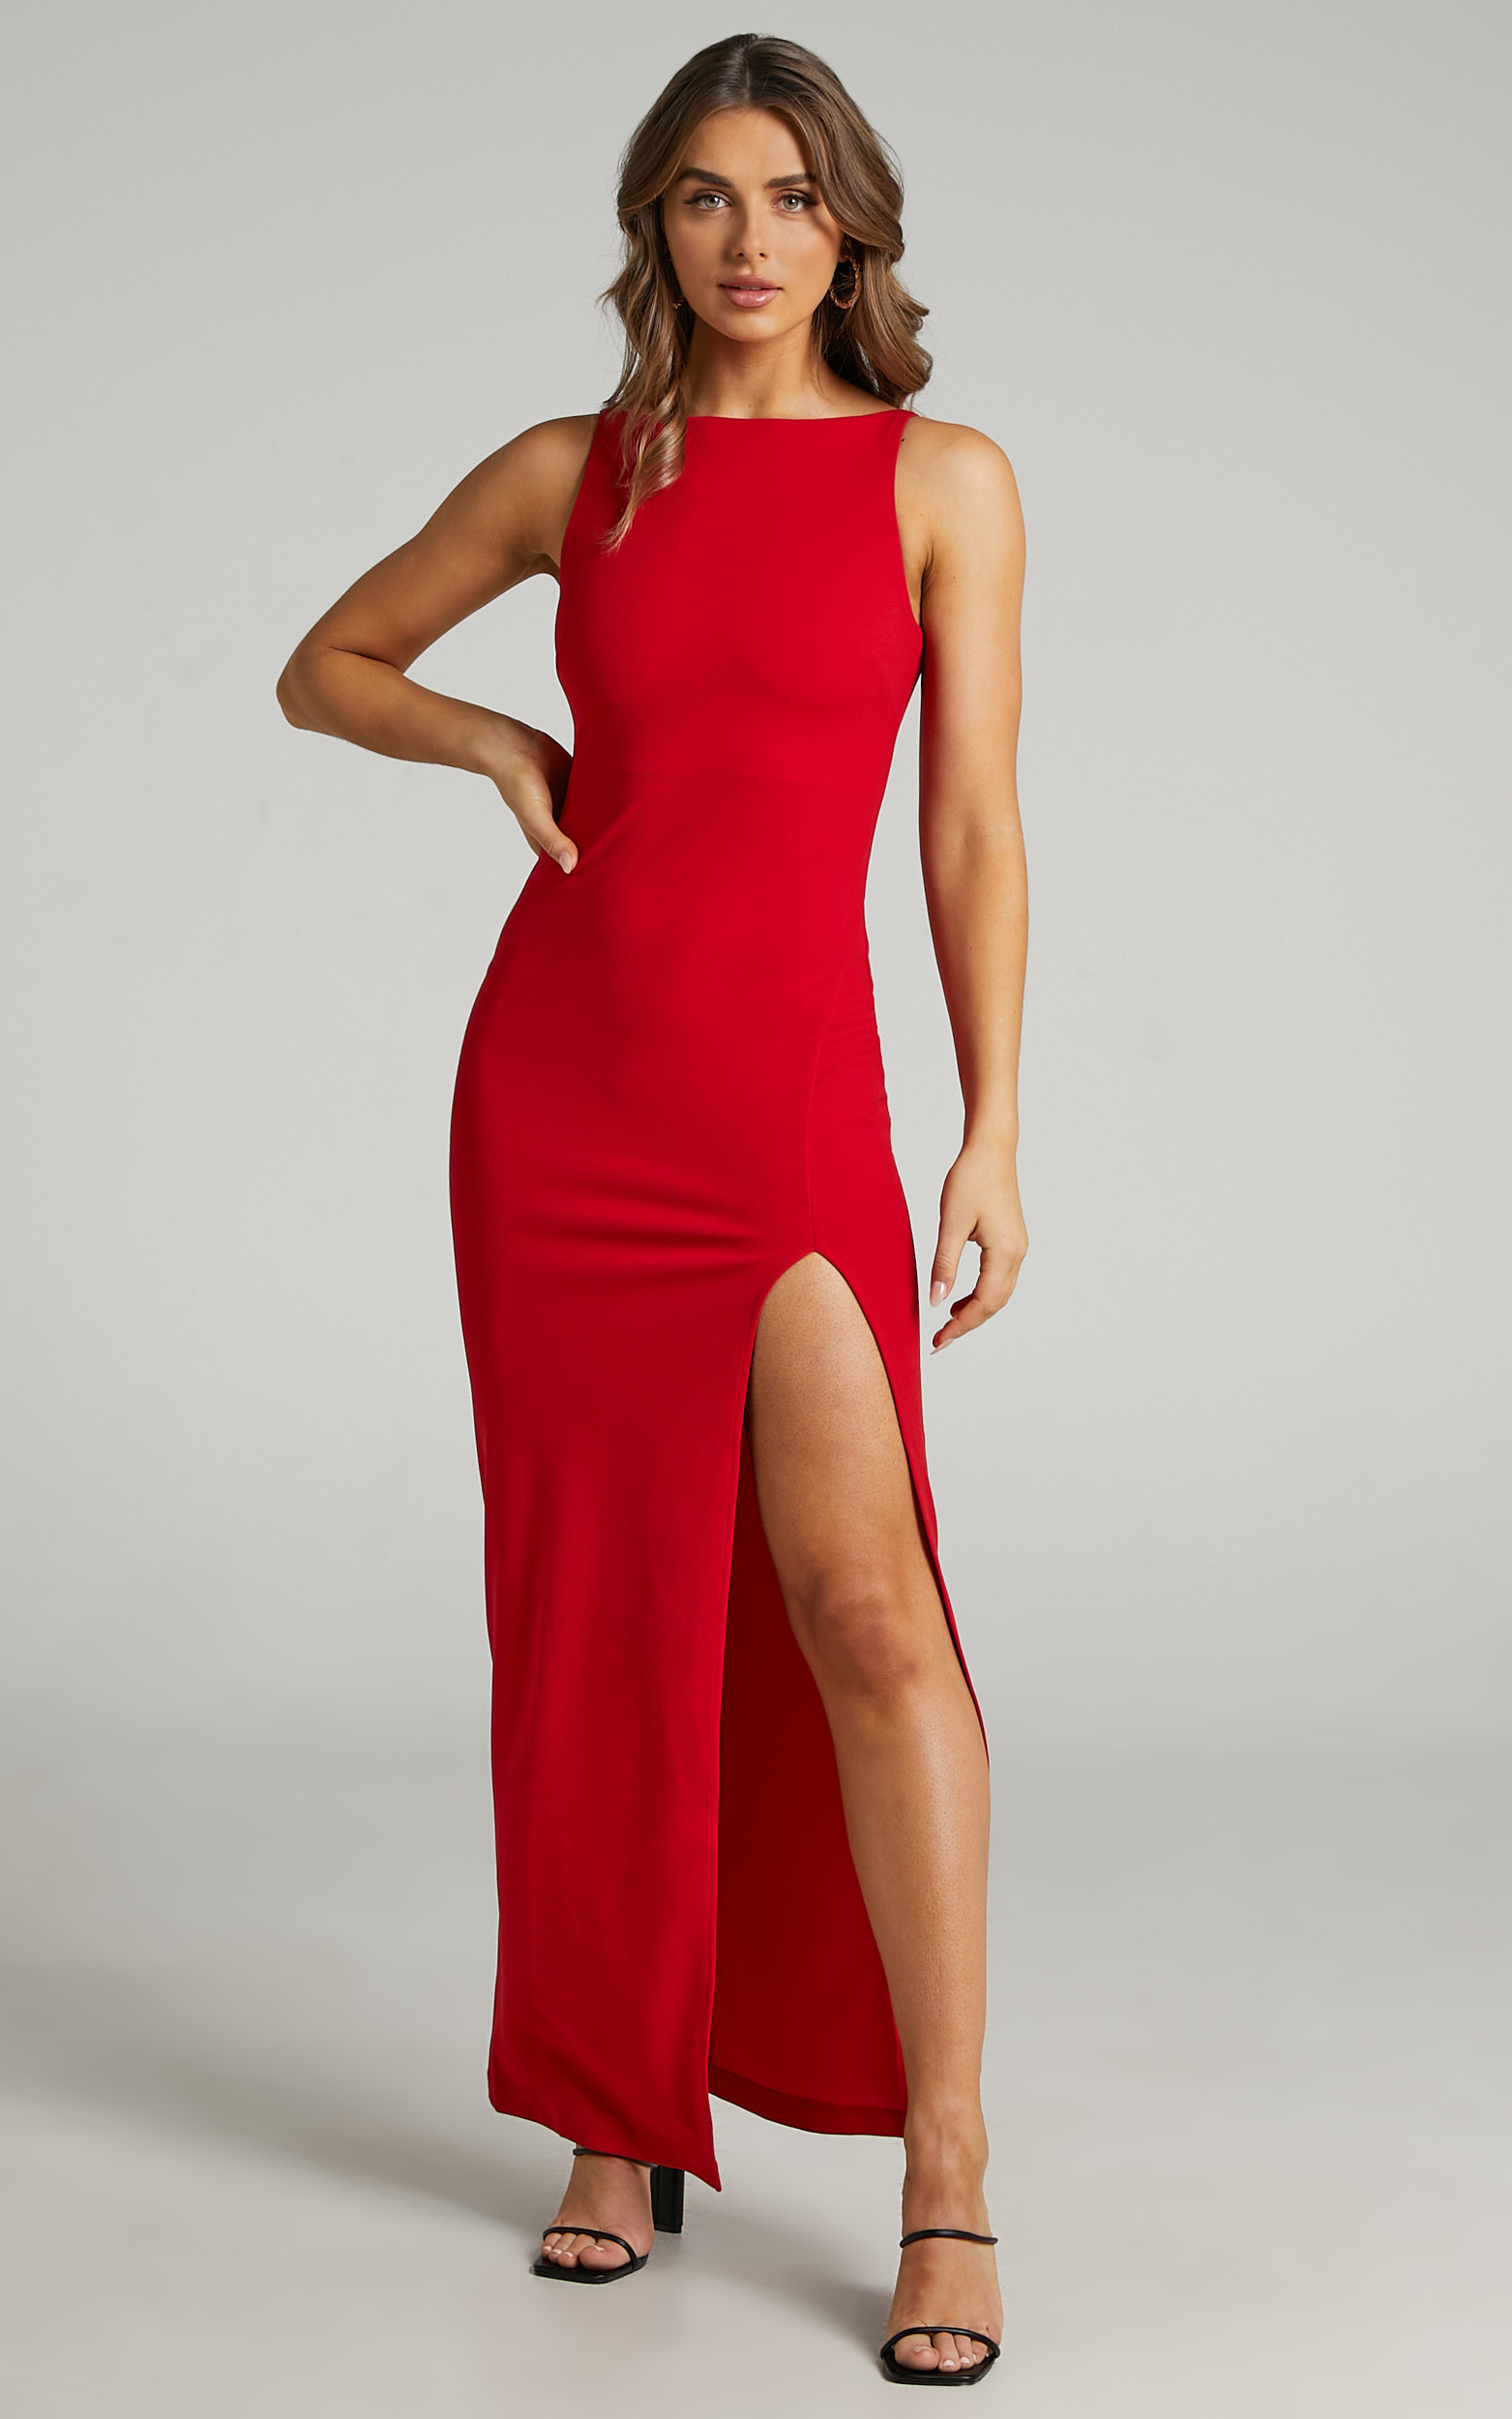 Indi Boat Neck Bodycon Maxi Dress in Red - 06, RED3, hi-res image number null